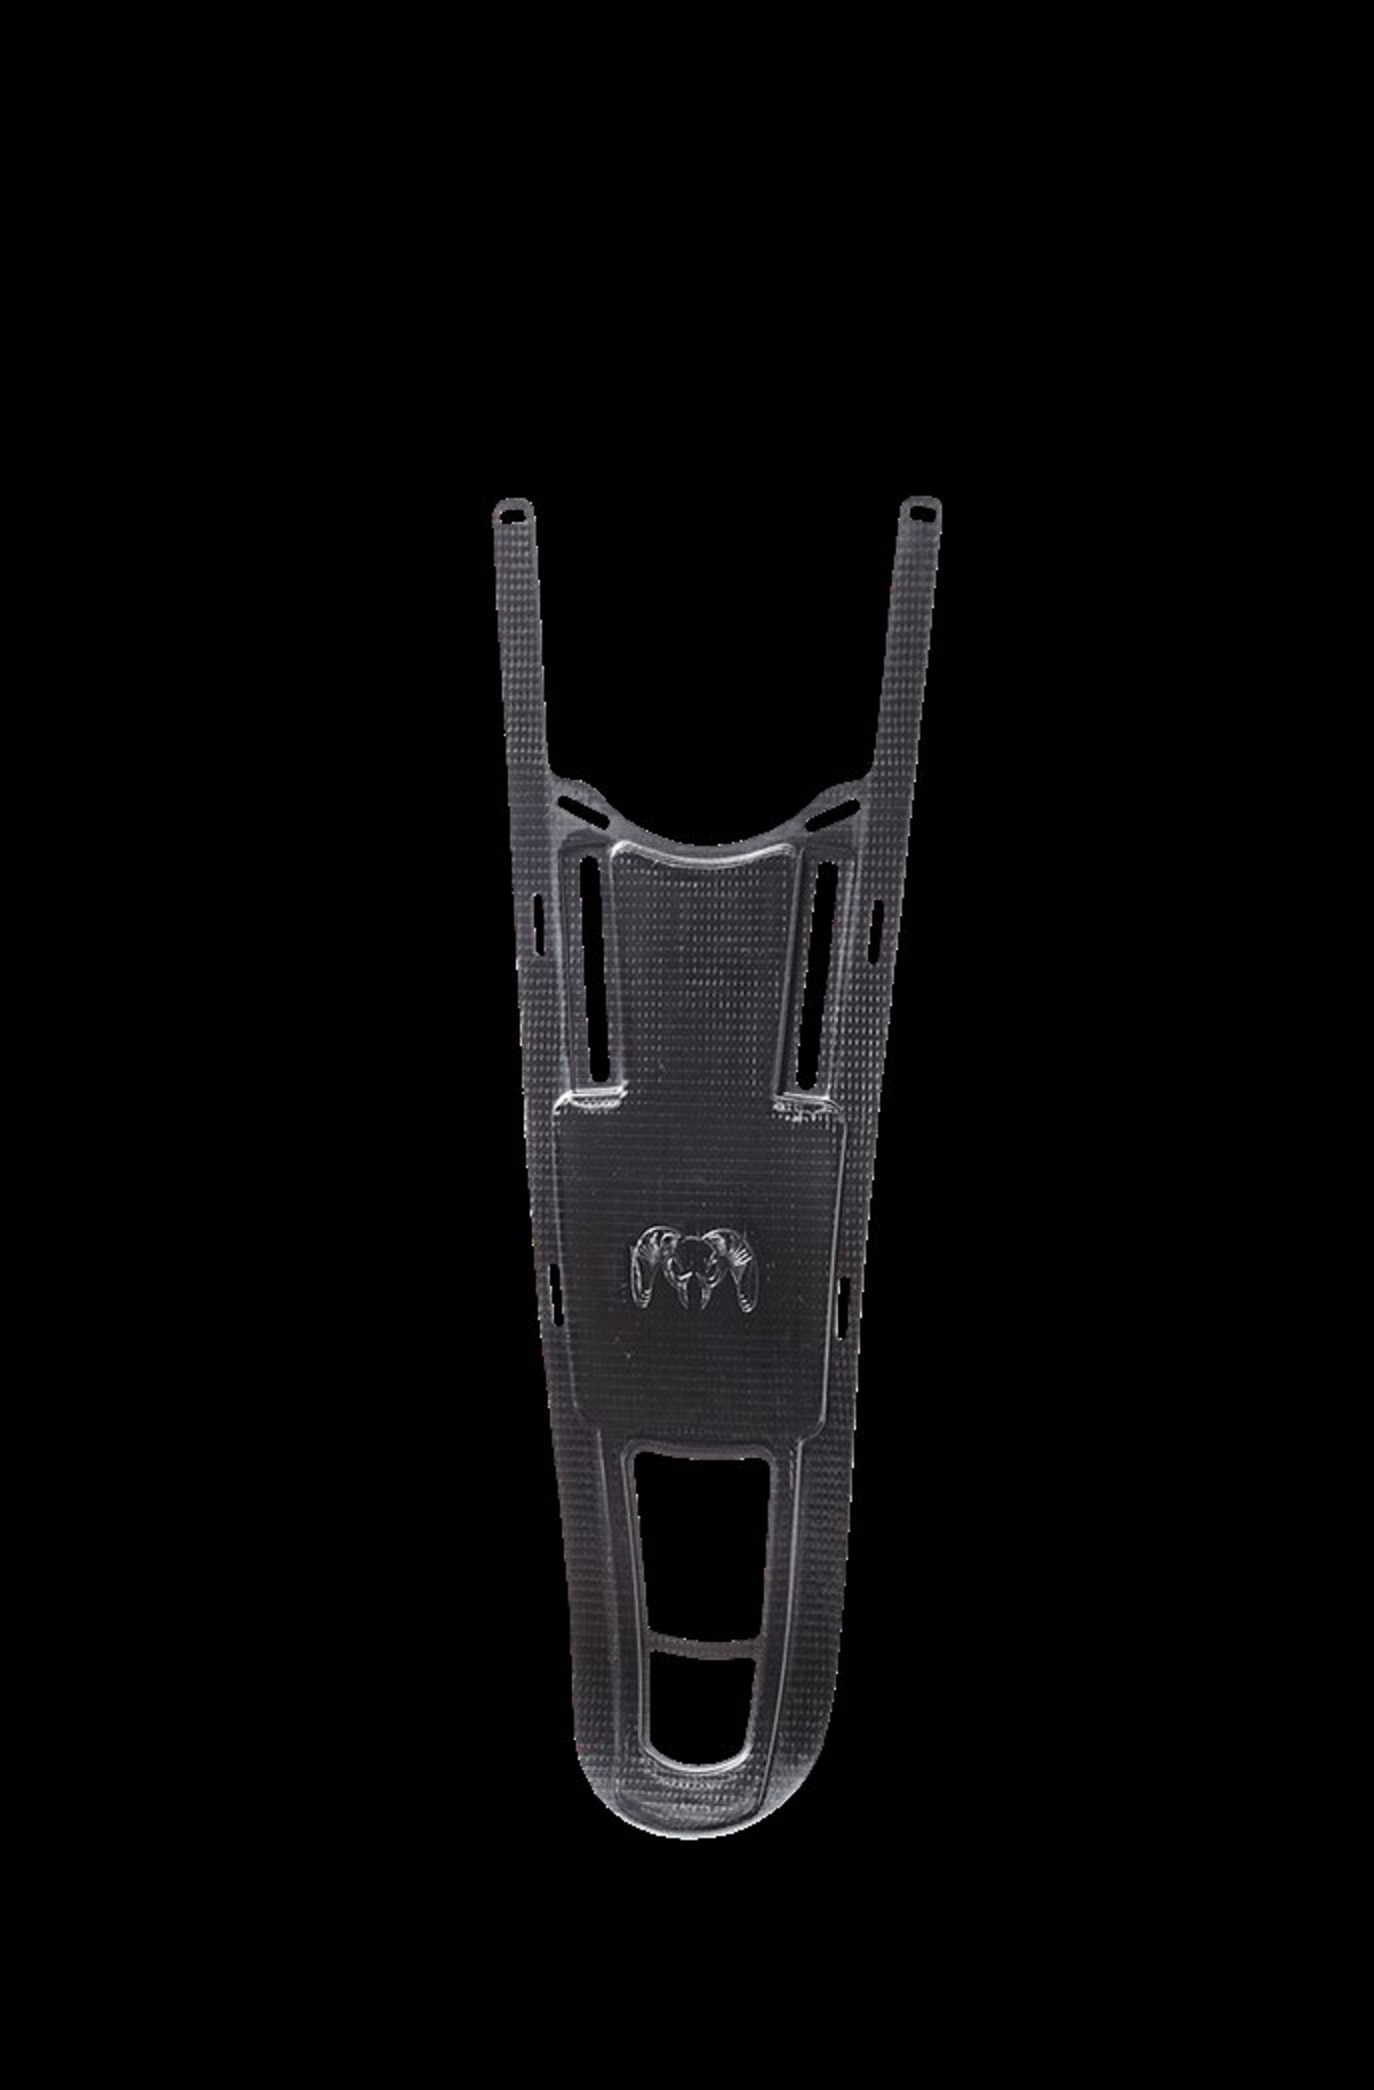 Chomarat will feature the newly launched Kuiu Ultra backpack frame at CAMX 2016, take place at the end of September.